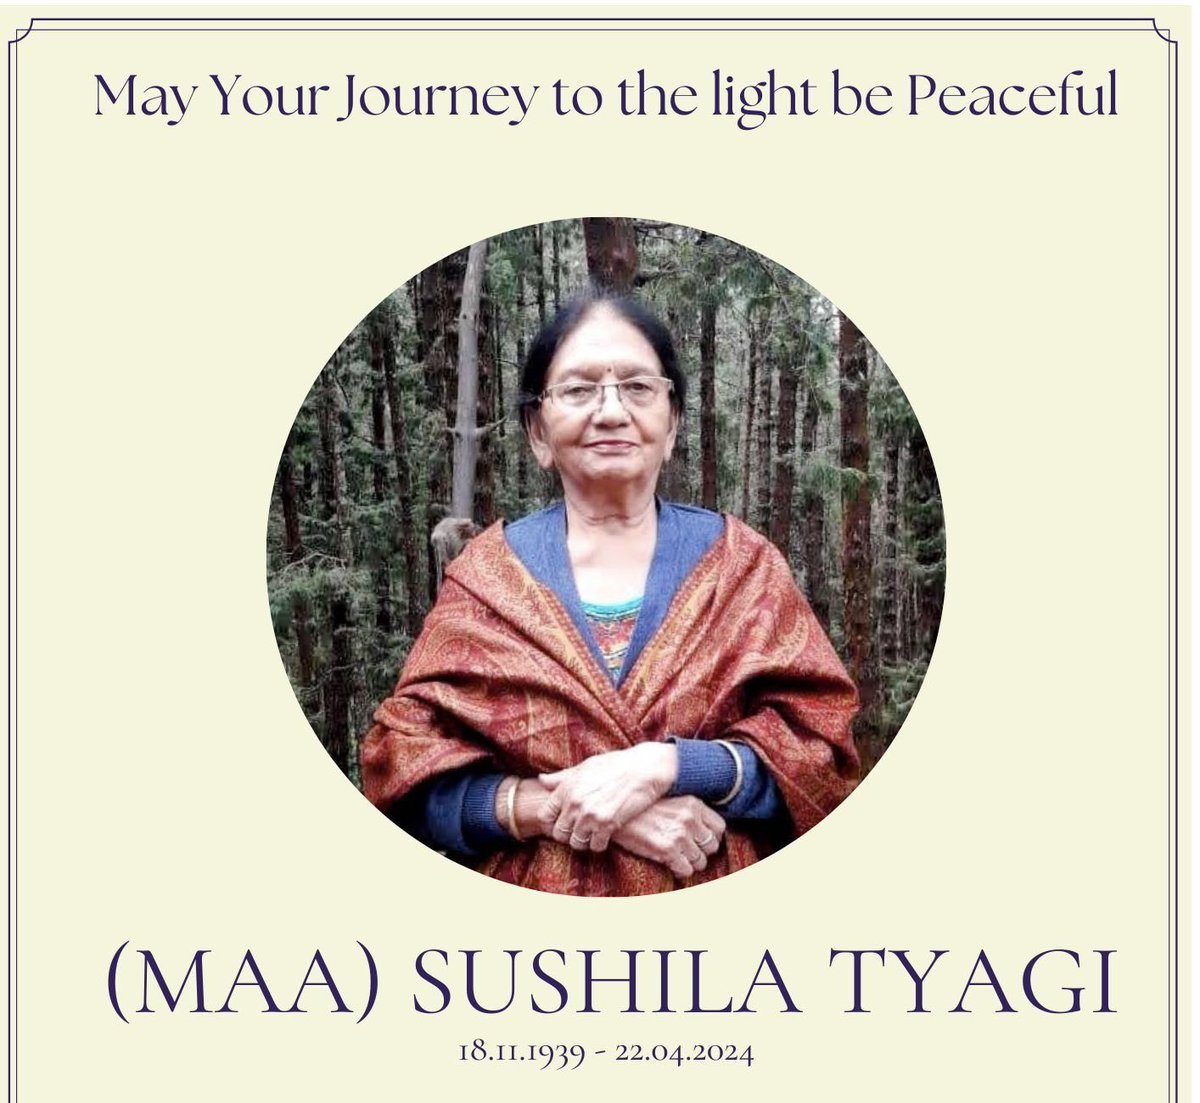 “It is with deep sorrow that we announce the passing of our beloved mother, Sushila Tyagi (18.11.1939 - 22.04.2024). Her grace and wisdom have been a guiding light in our lives. May her journey to the light be peaceful. #InLovingMemory #SushilaTyagi”